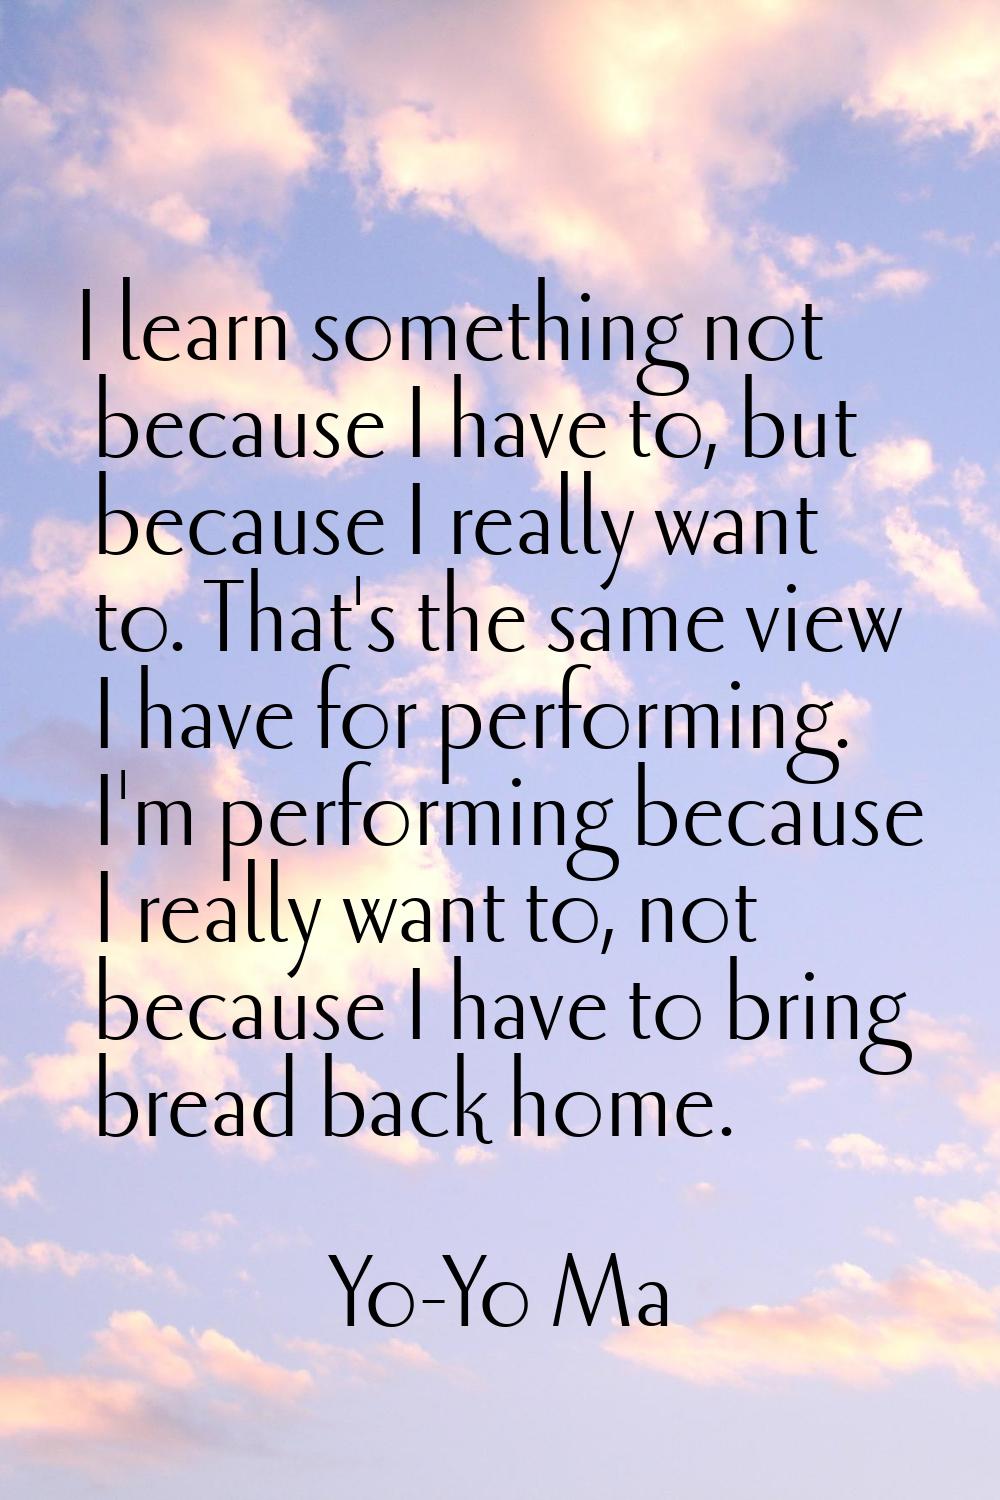 I learn something not because I have to, but because I really want to. That's the same view I have 